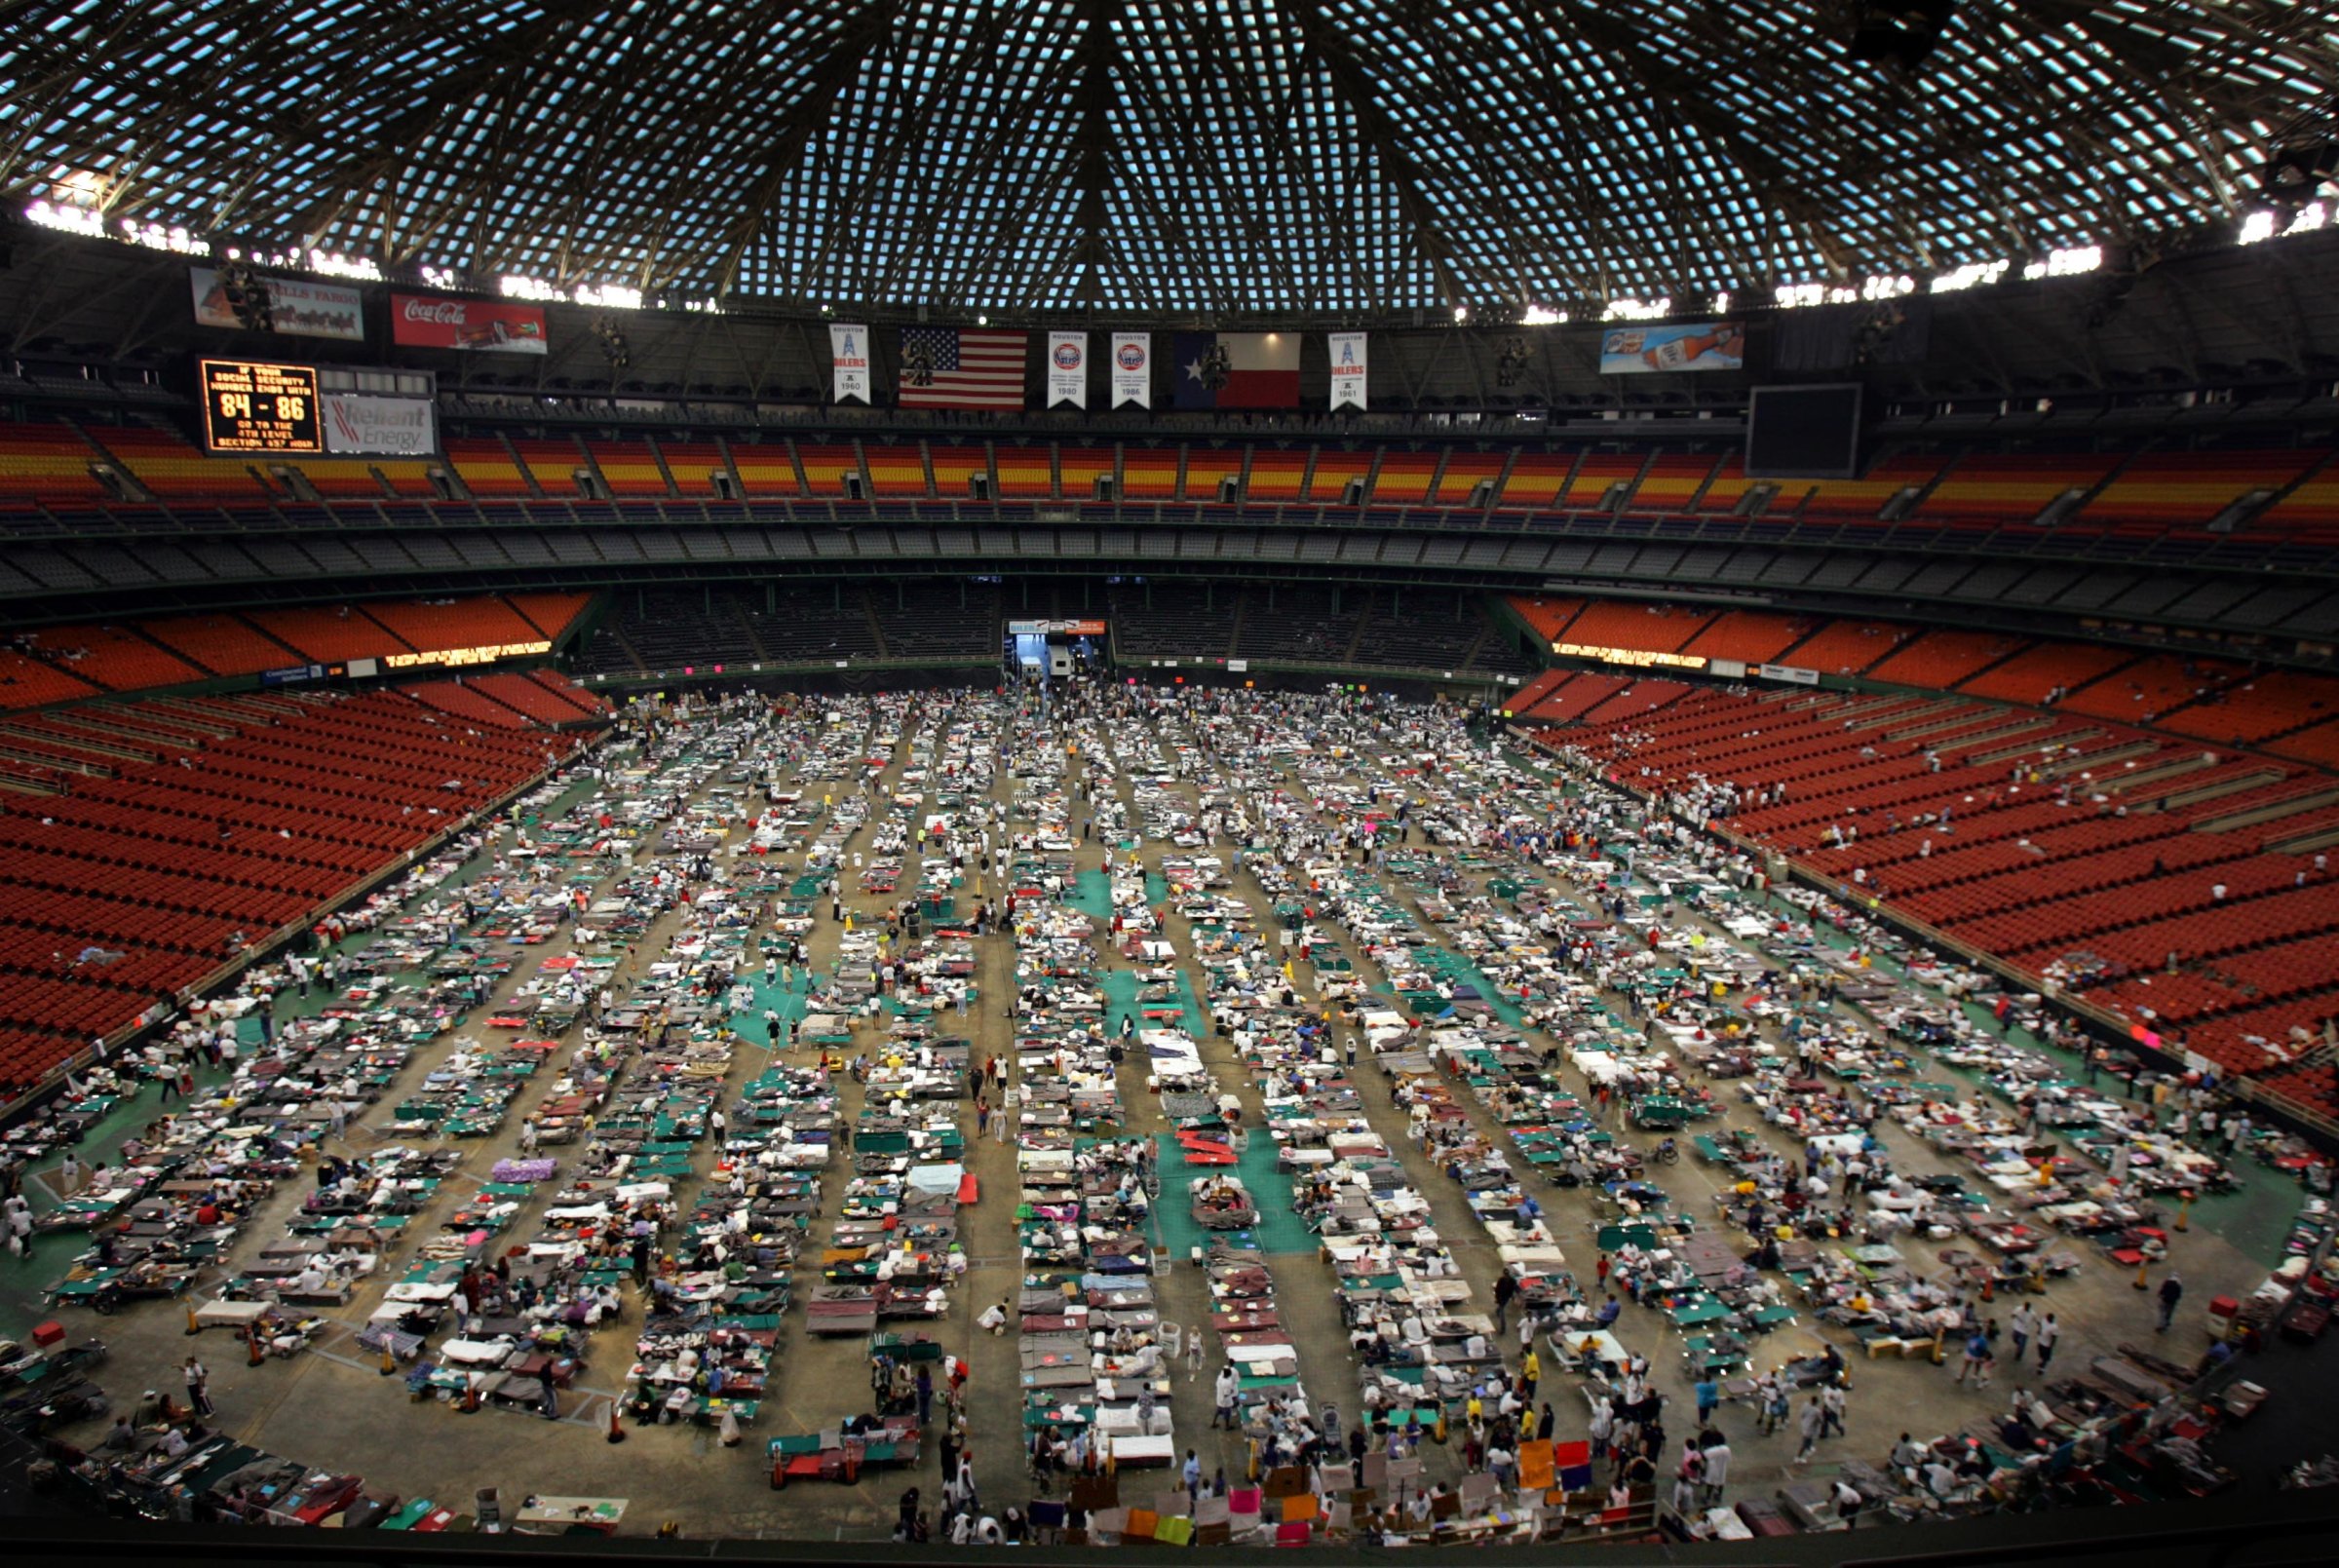 Victims of Hurricane Katrina stay at the Astrodome stadium in Houston.